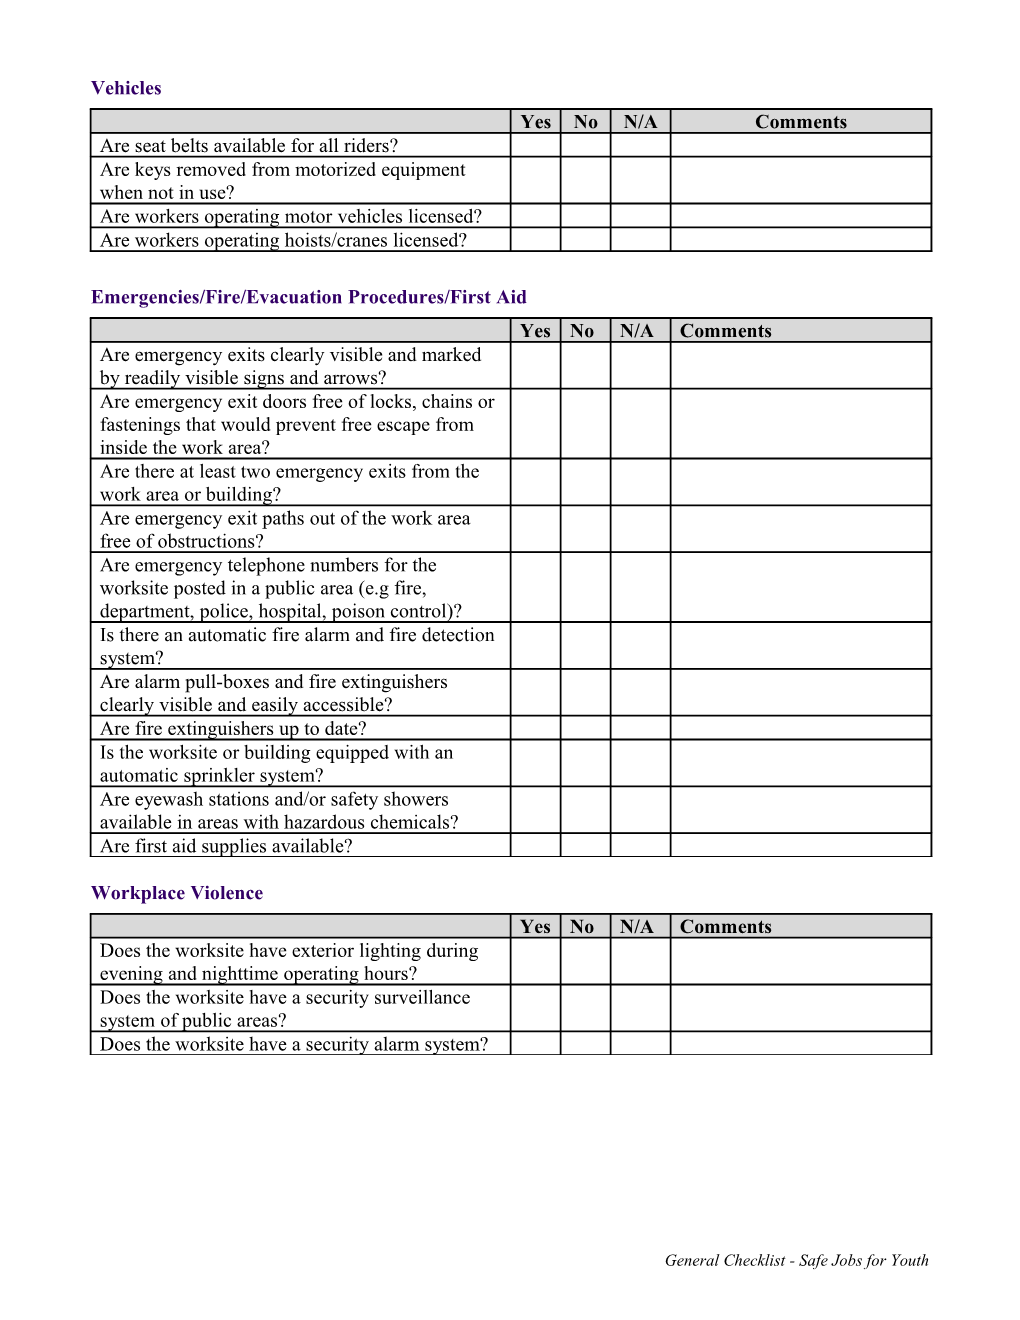 General Worksite Safety and Health Checklist